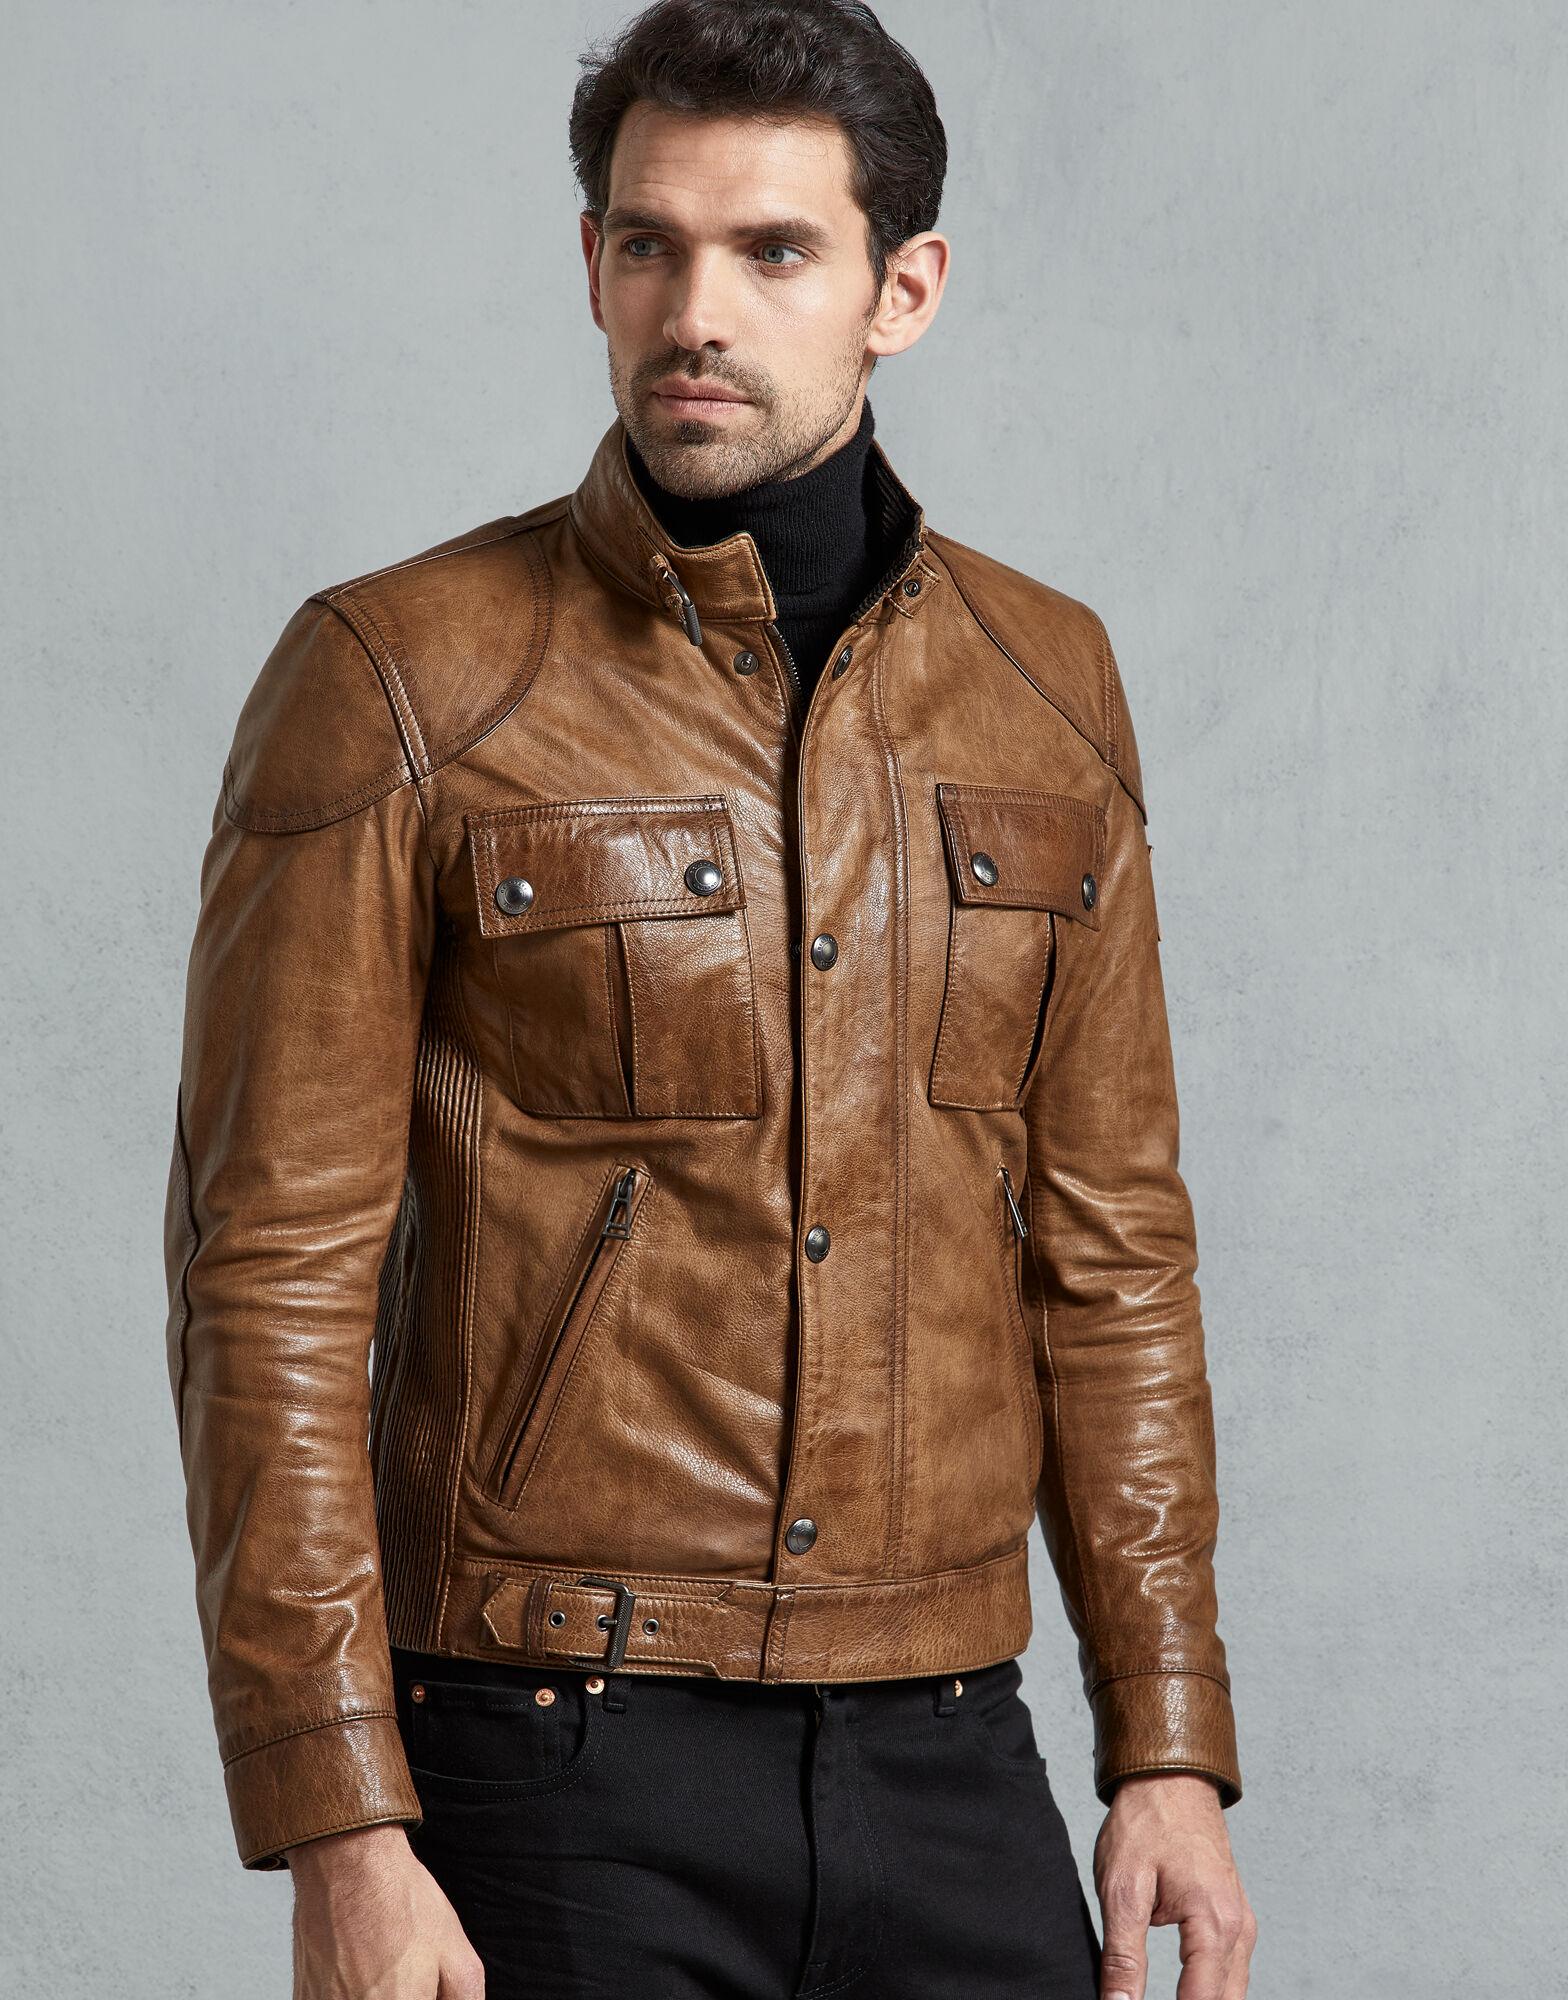 Belstaff Gangster 2.0 Leather Jacket Hotsell, SAVE 36% -  threehouselawfirm.com